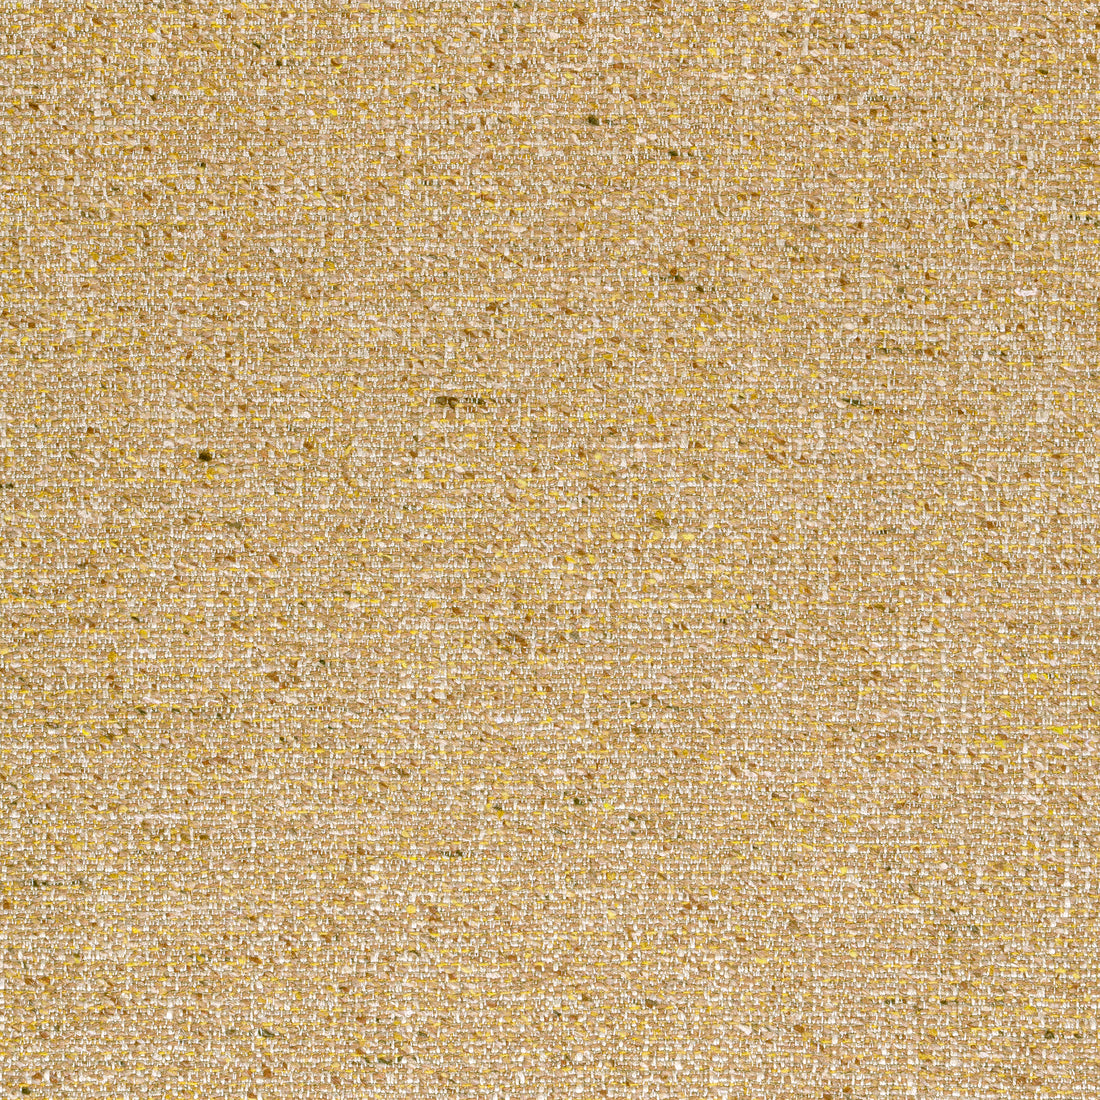 Shannon fabric in camel color - pattern number W80936 - by Thibaut in the Dunmore collection